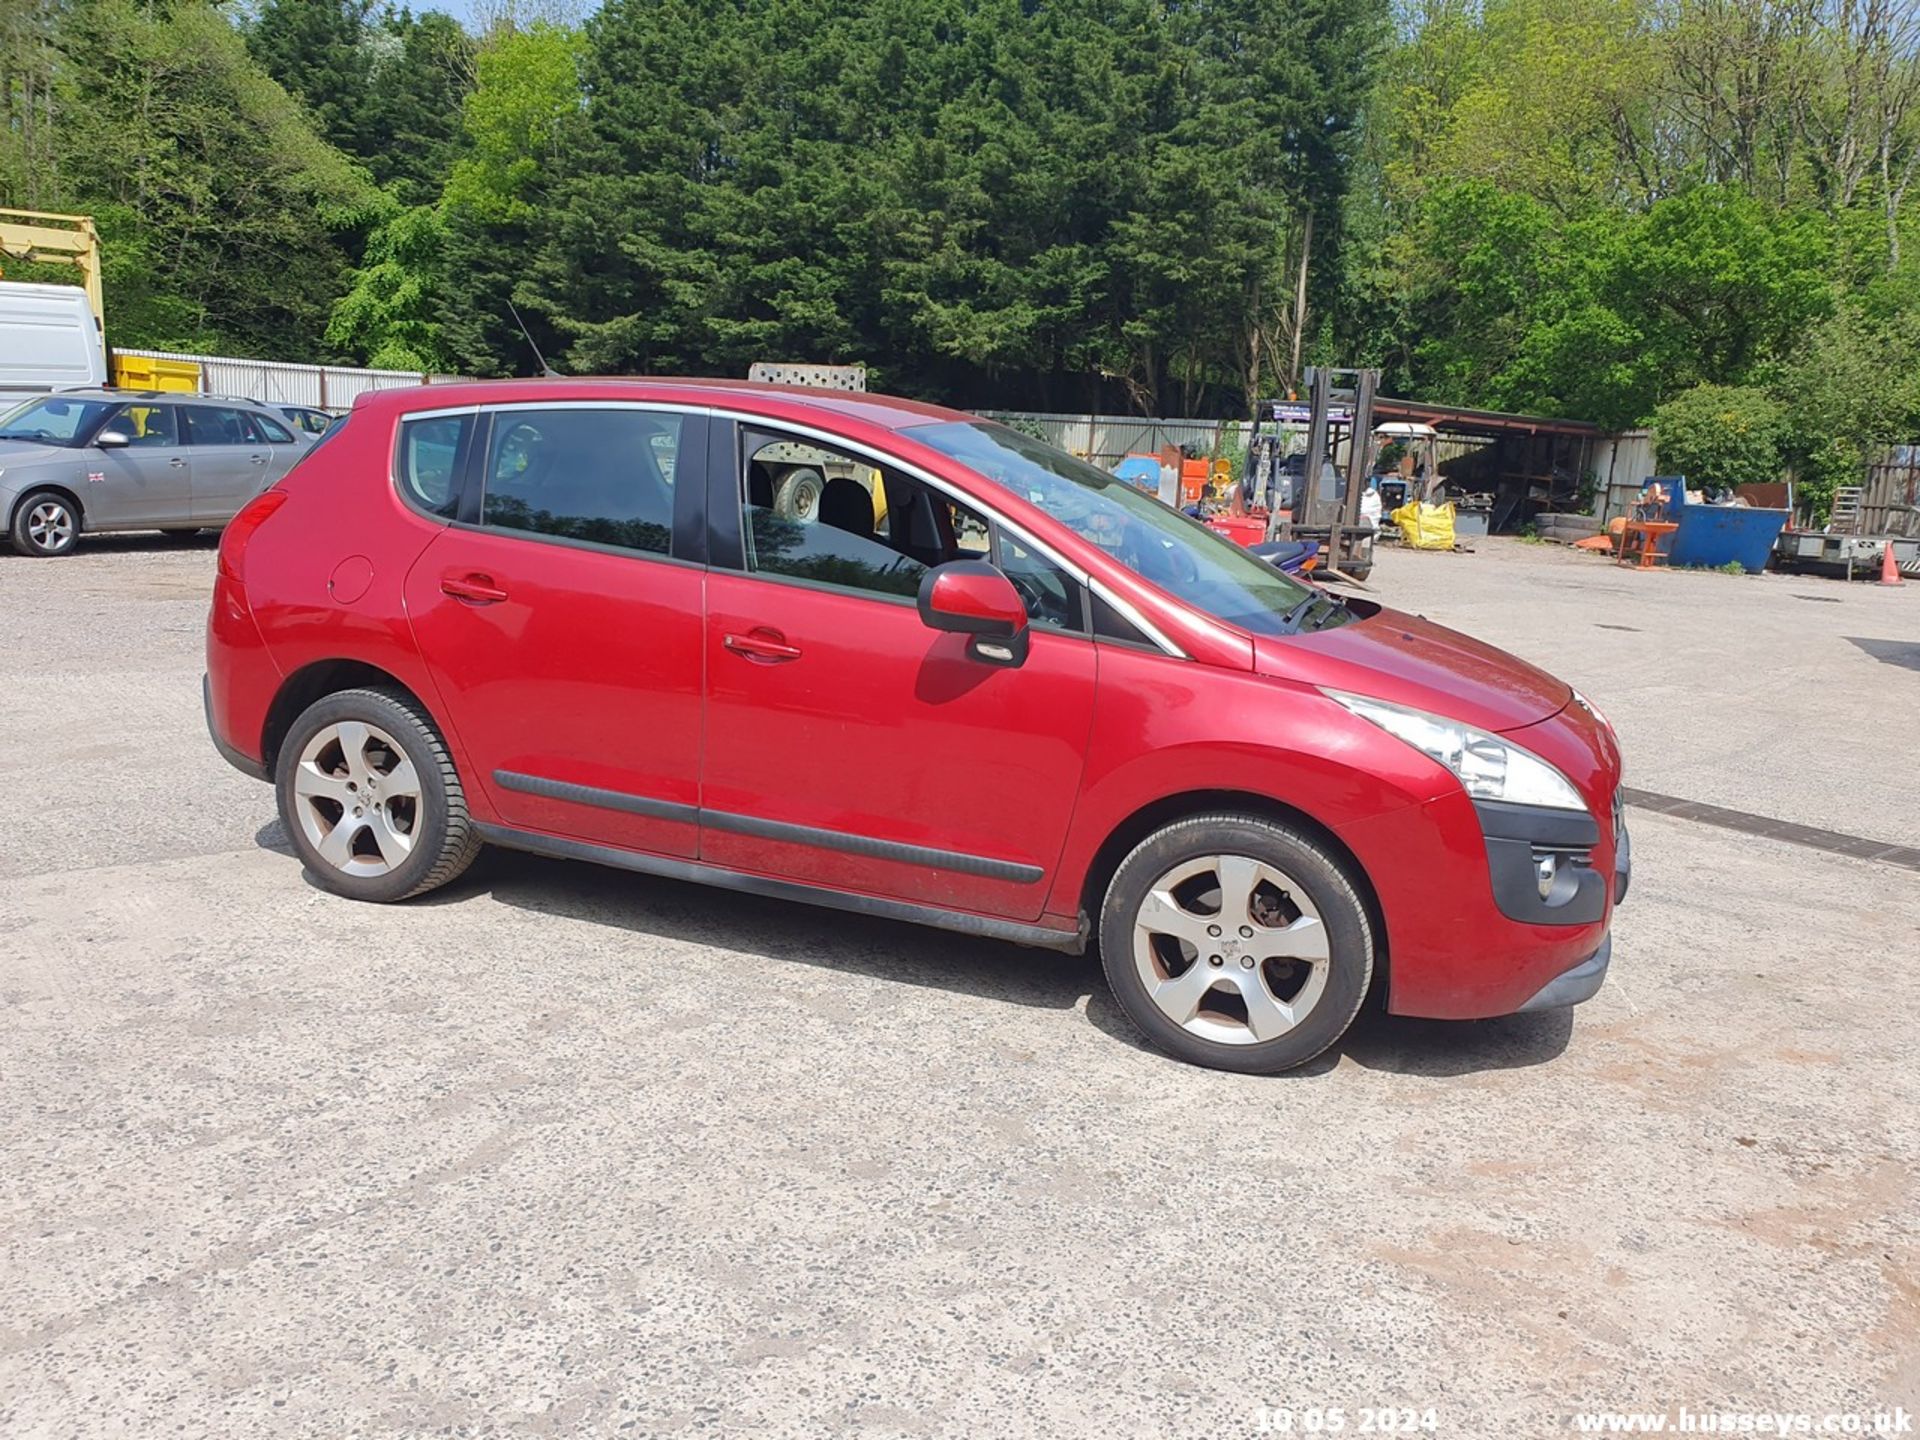 11/61 PEUGEOT 3008 SPORT E-HDI S-A - 1560cc 5dr Hatchback (Red, 89k) - Image 7 of 49